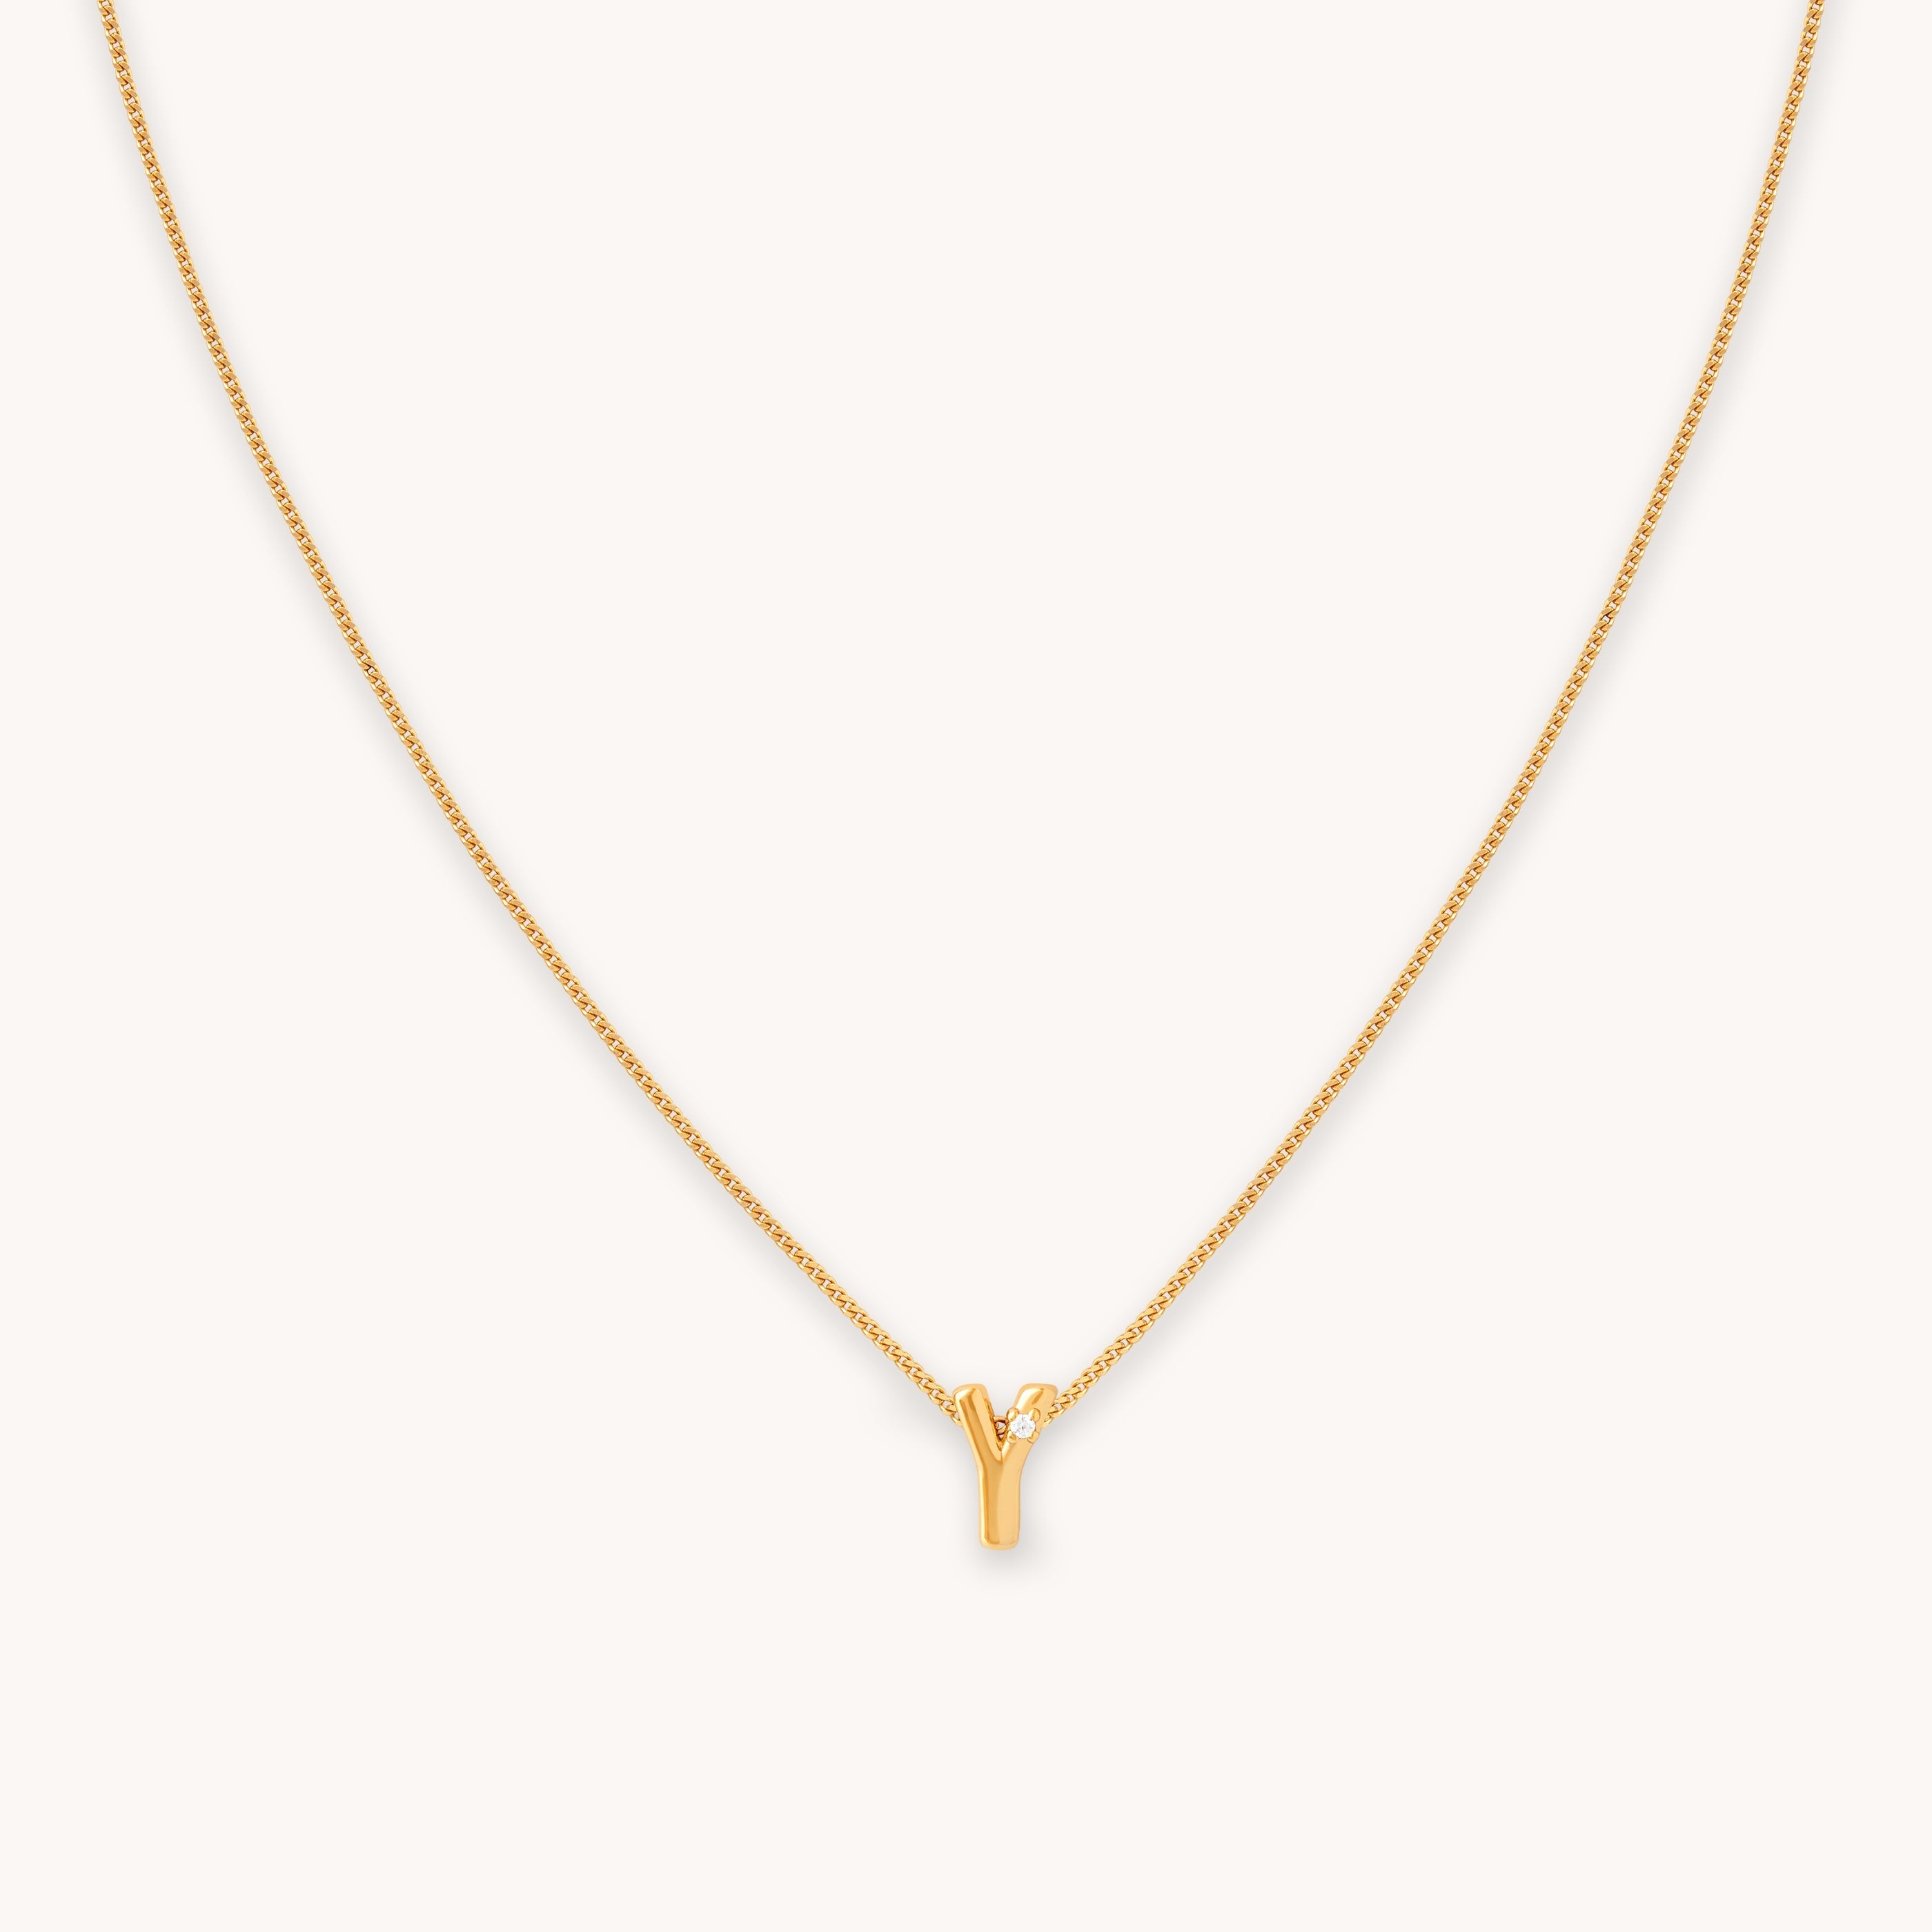 Y Gold Initial Pendant Necklace | Astrid & Miyu Necklaces